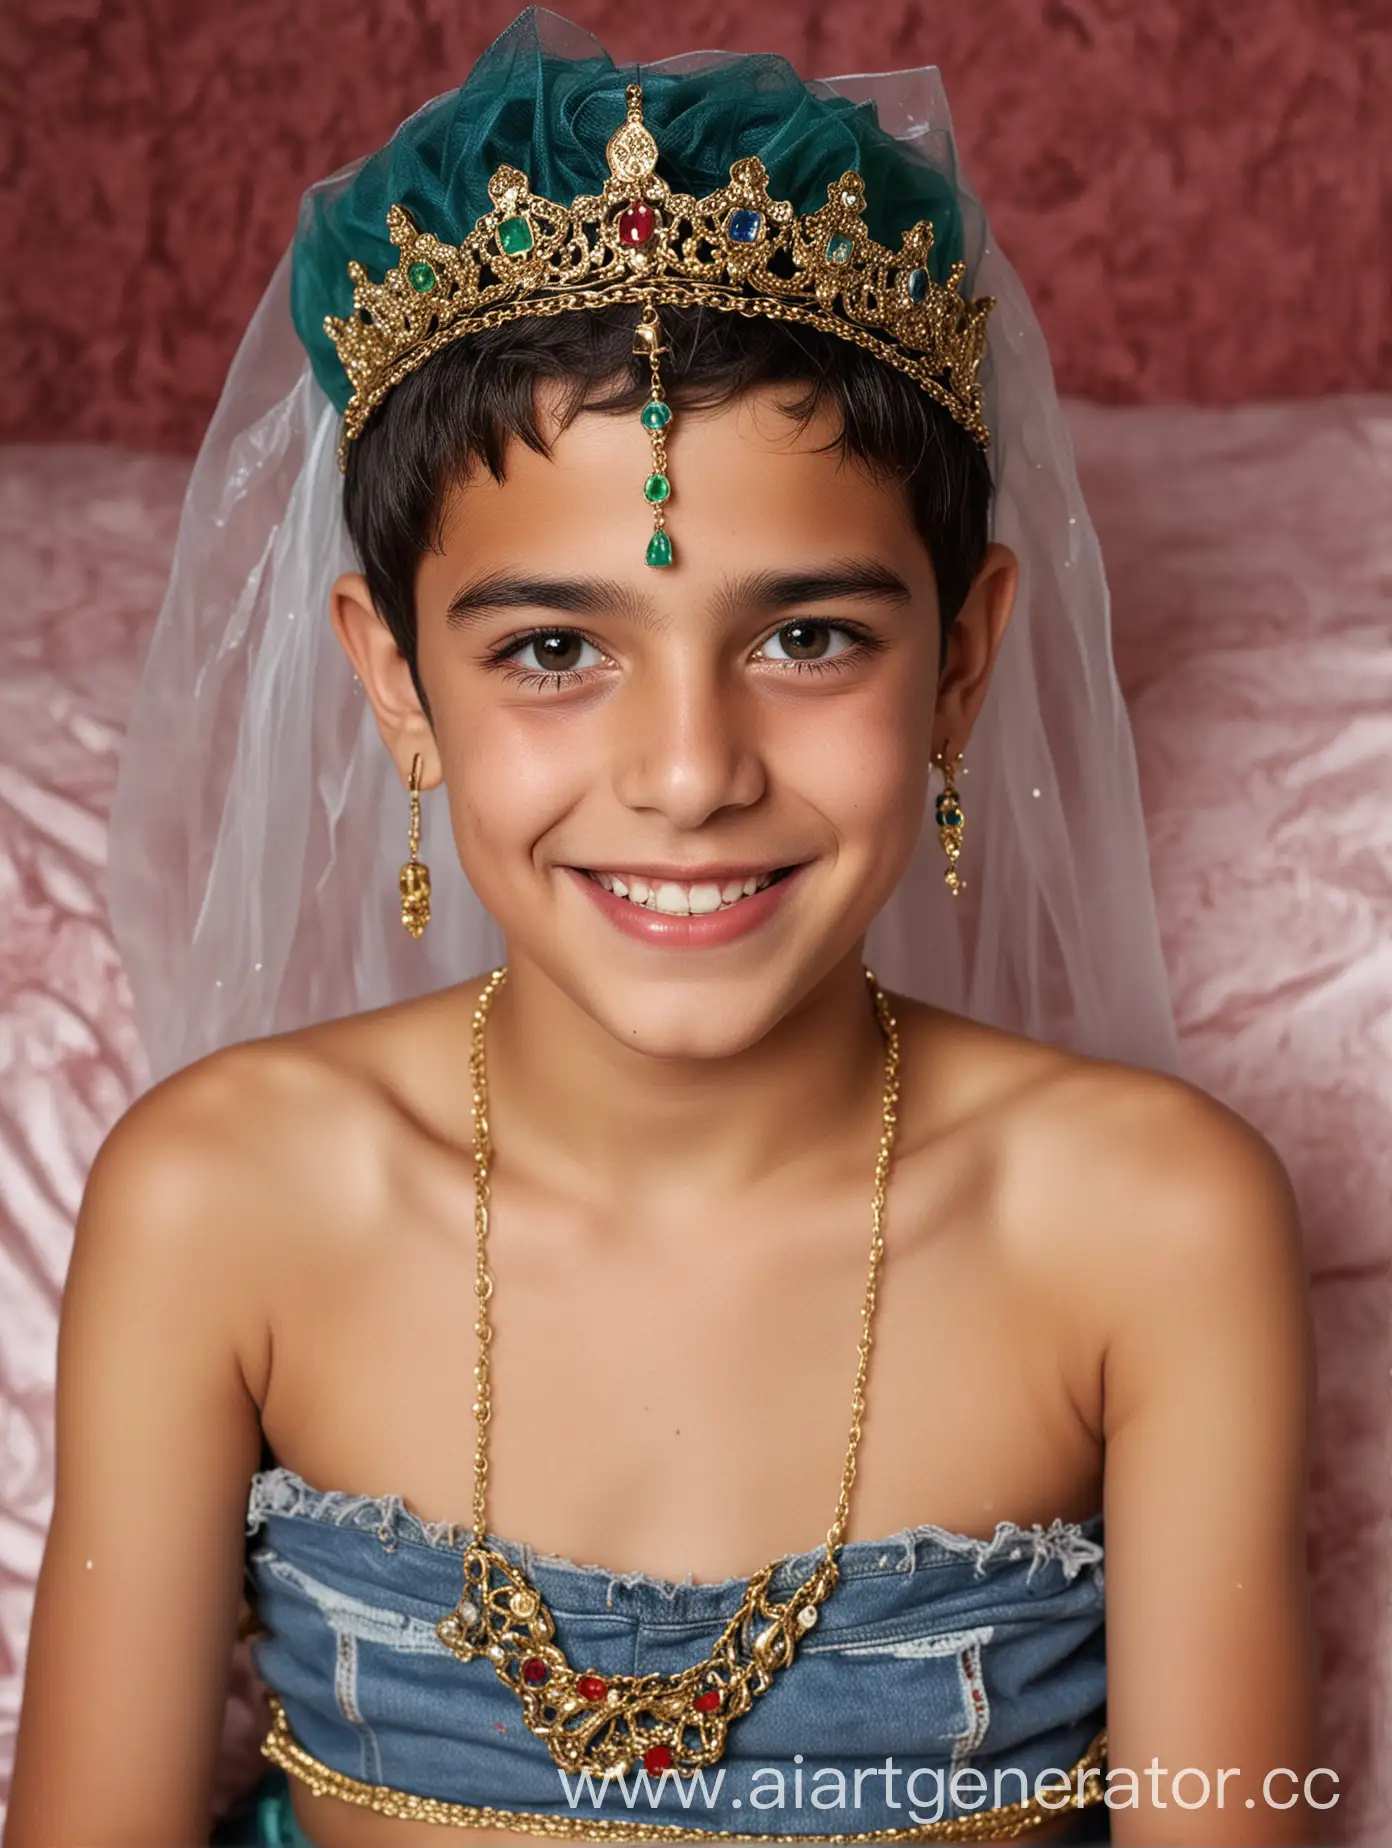 Charming-Arab-Boy-in-Exquisite-Wedding-Ensemble-Relaxing-on-Bed